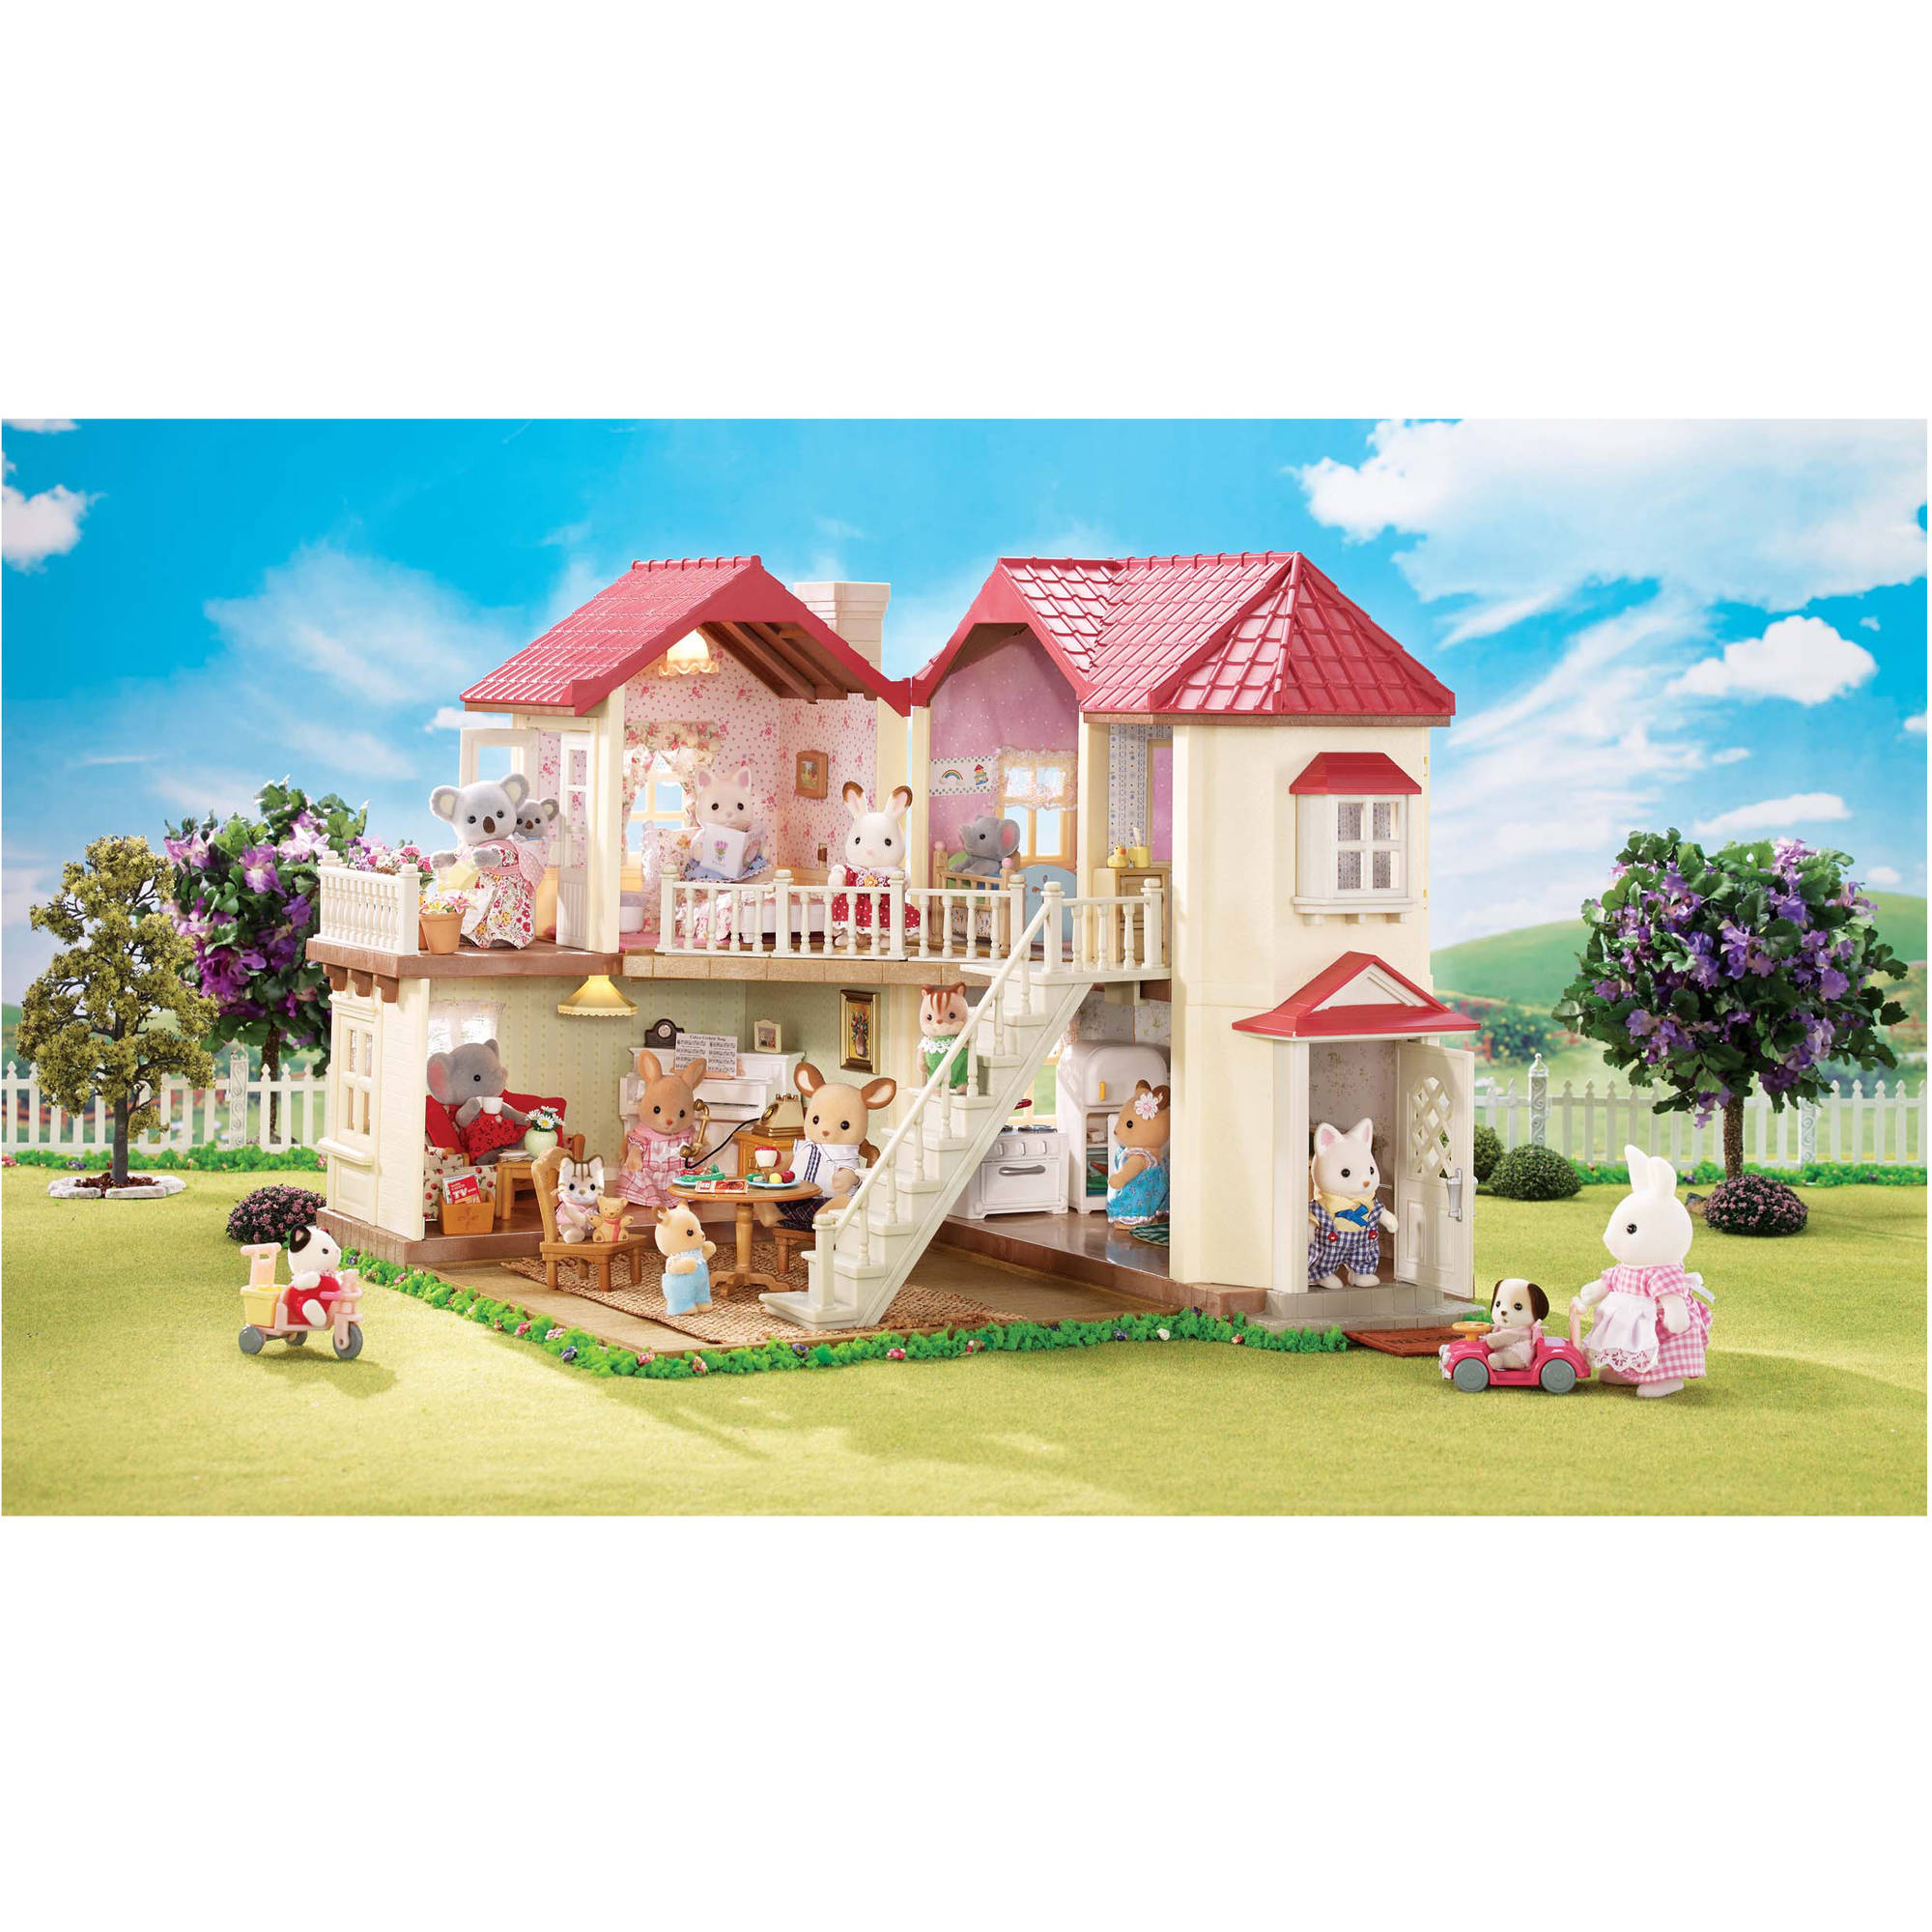 Calico Critters Luxury Townhome Gift Set - image 2 of 18